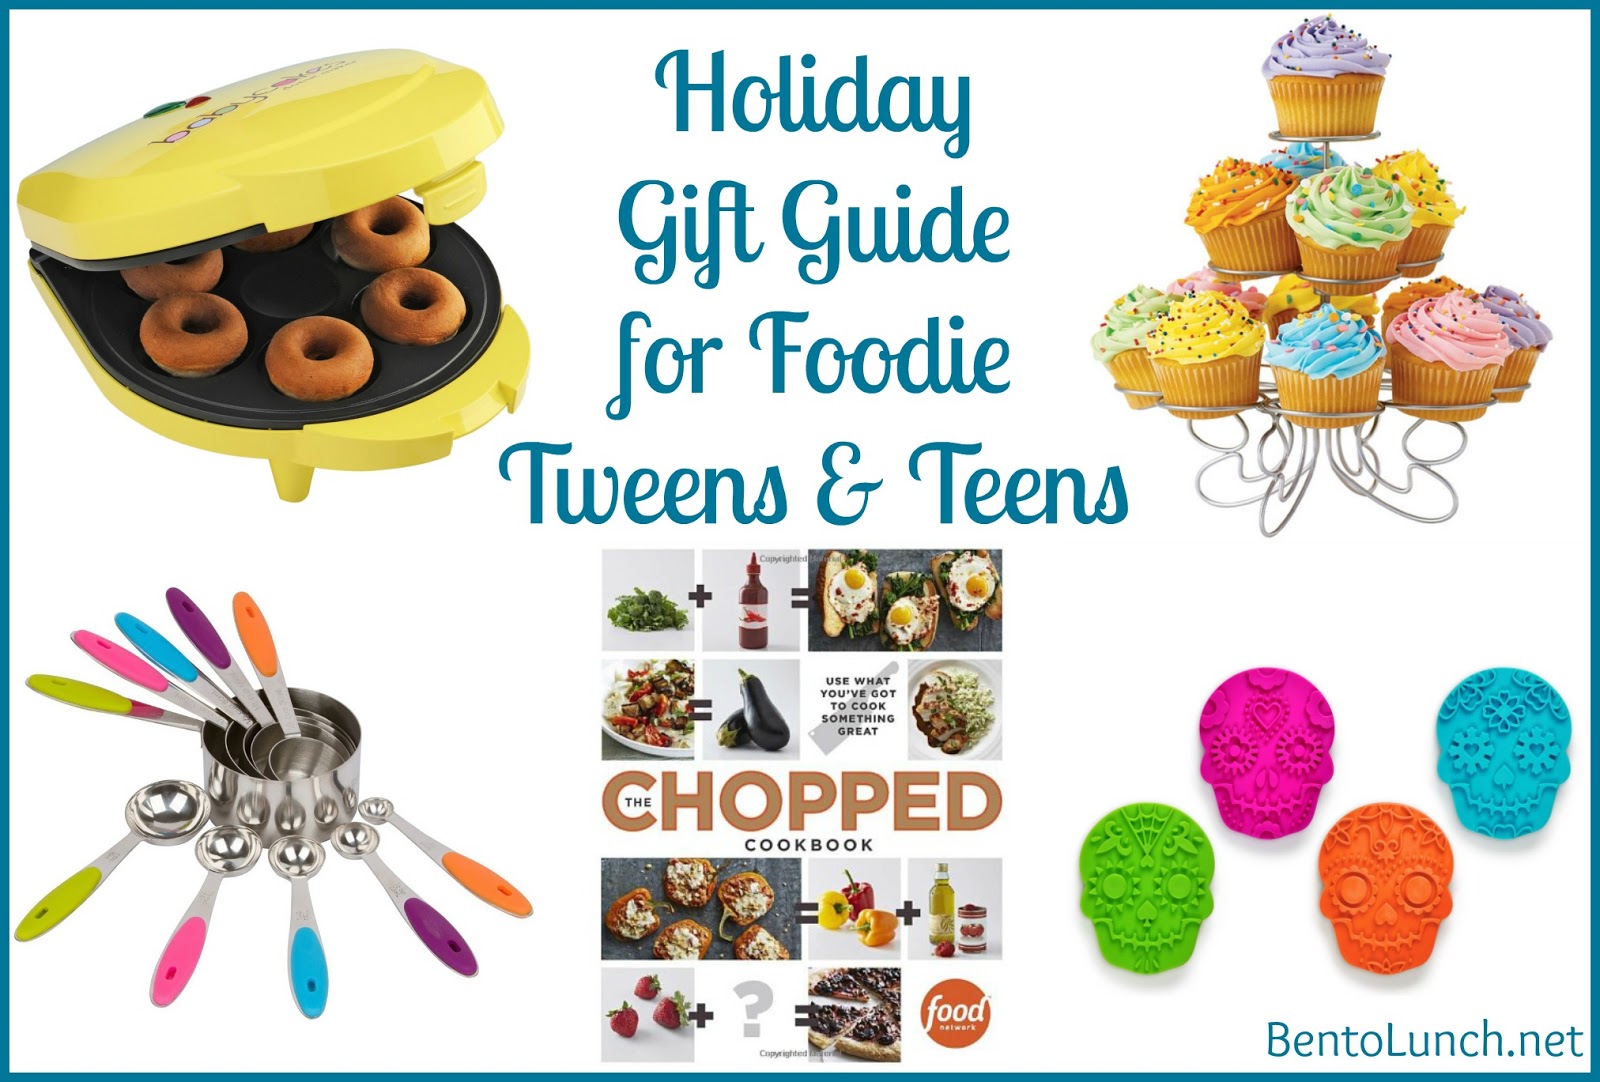 Holiday Wish List: Gift Ideas for the Cook